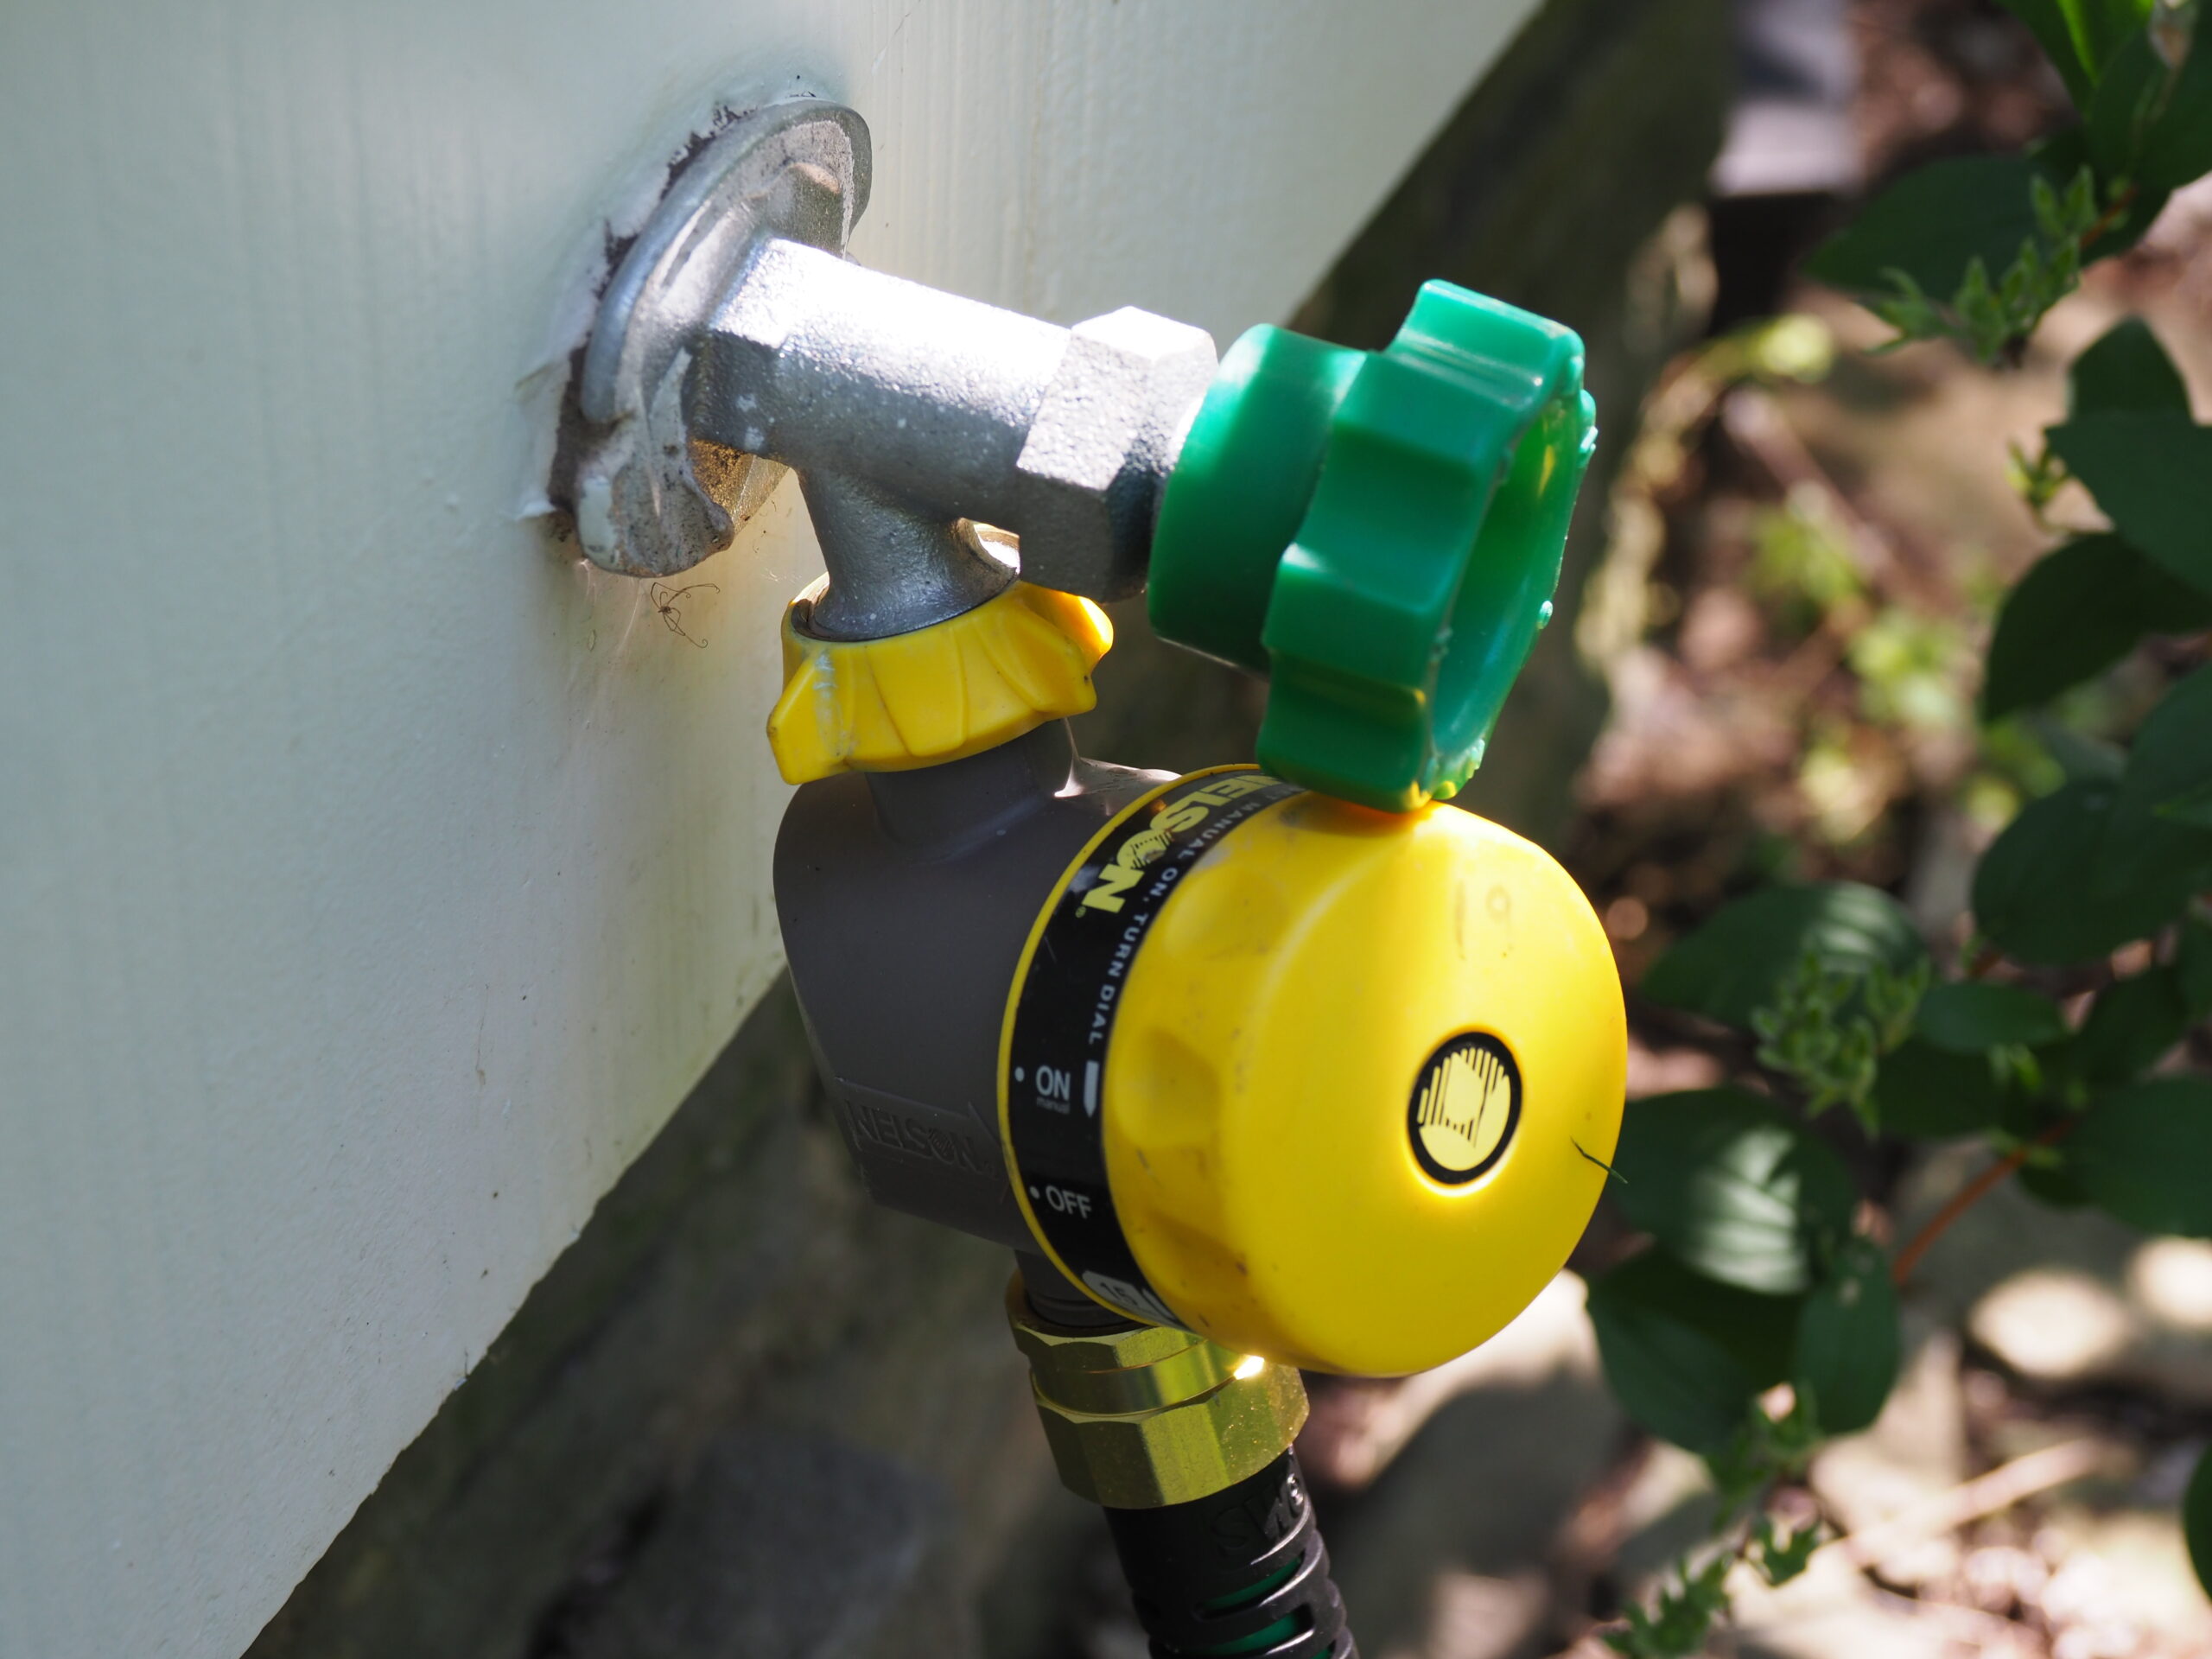 A mechanical water clock attached to a hose bib can be a time saver and can meter water based on the length of time you set It for. Make sure all the connections are tight to eliminate leaks as wasted water.  ANDREW MESSINGER